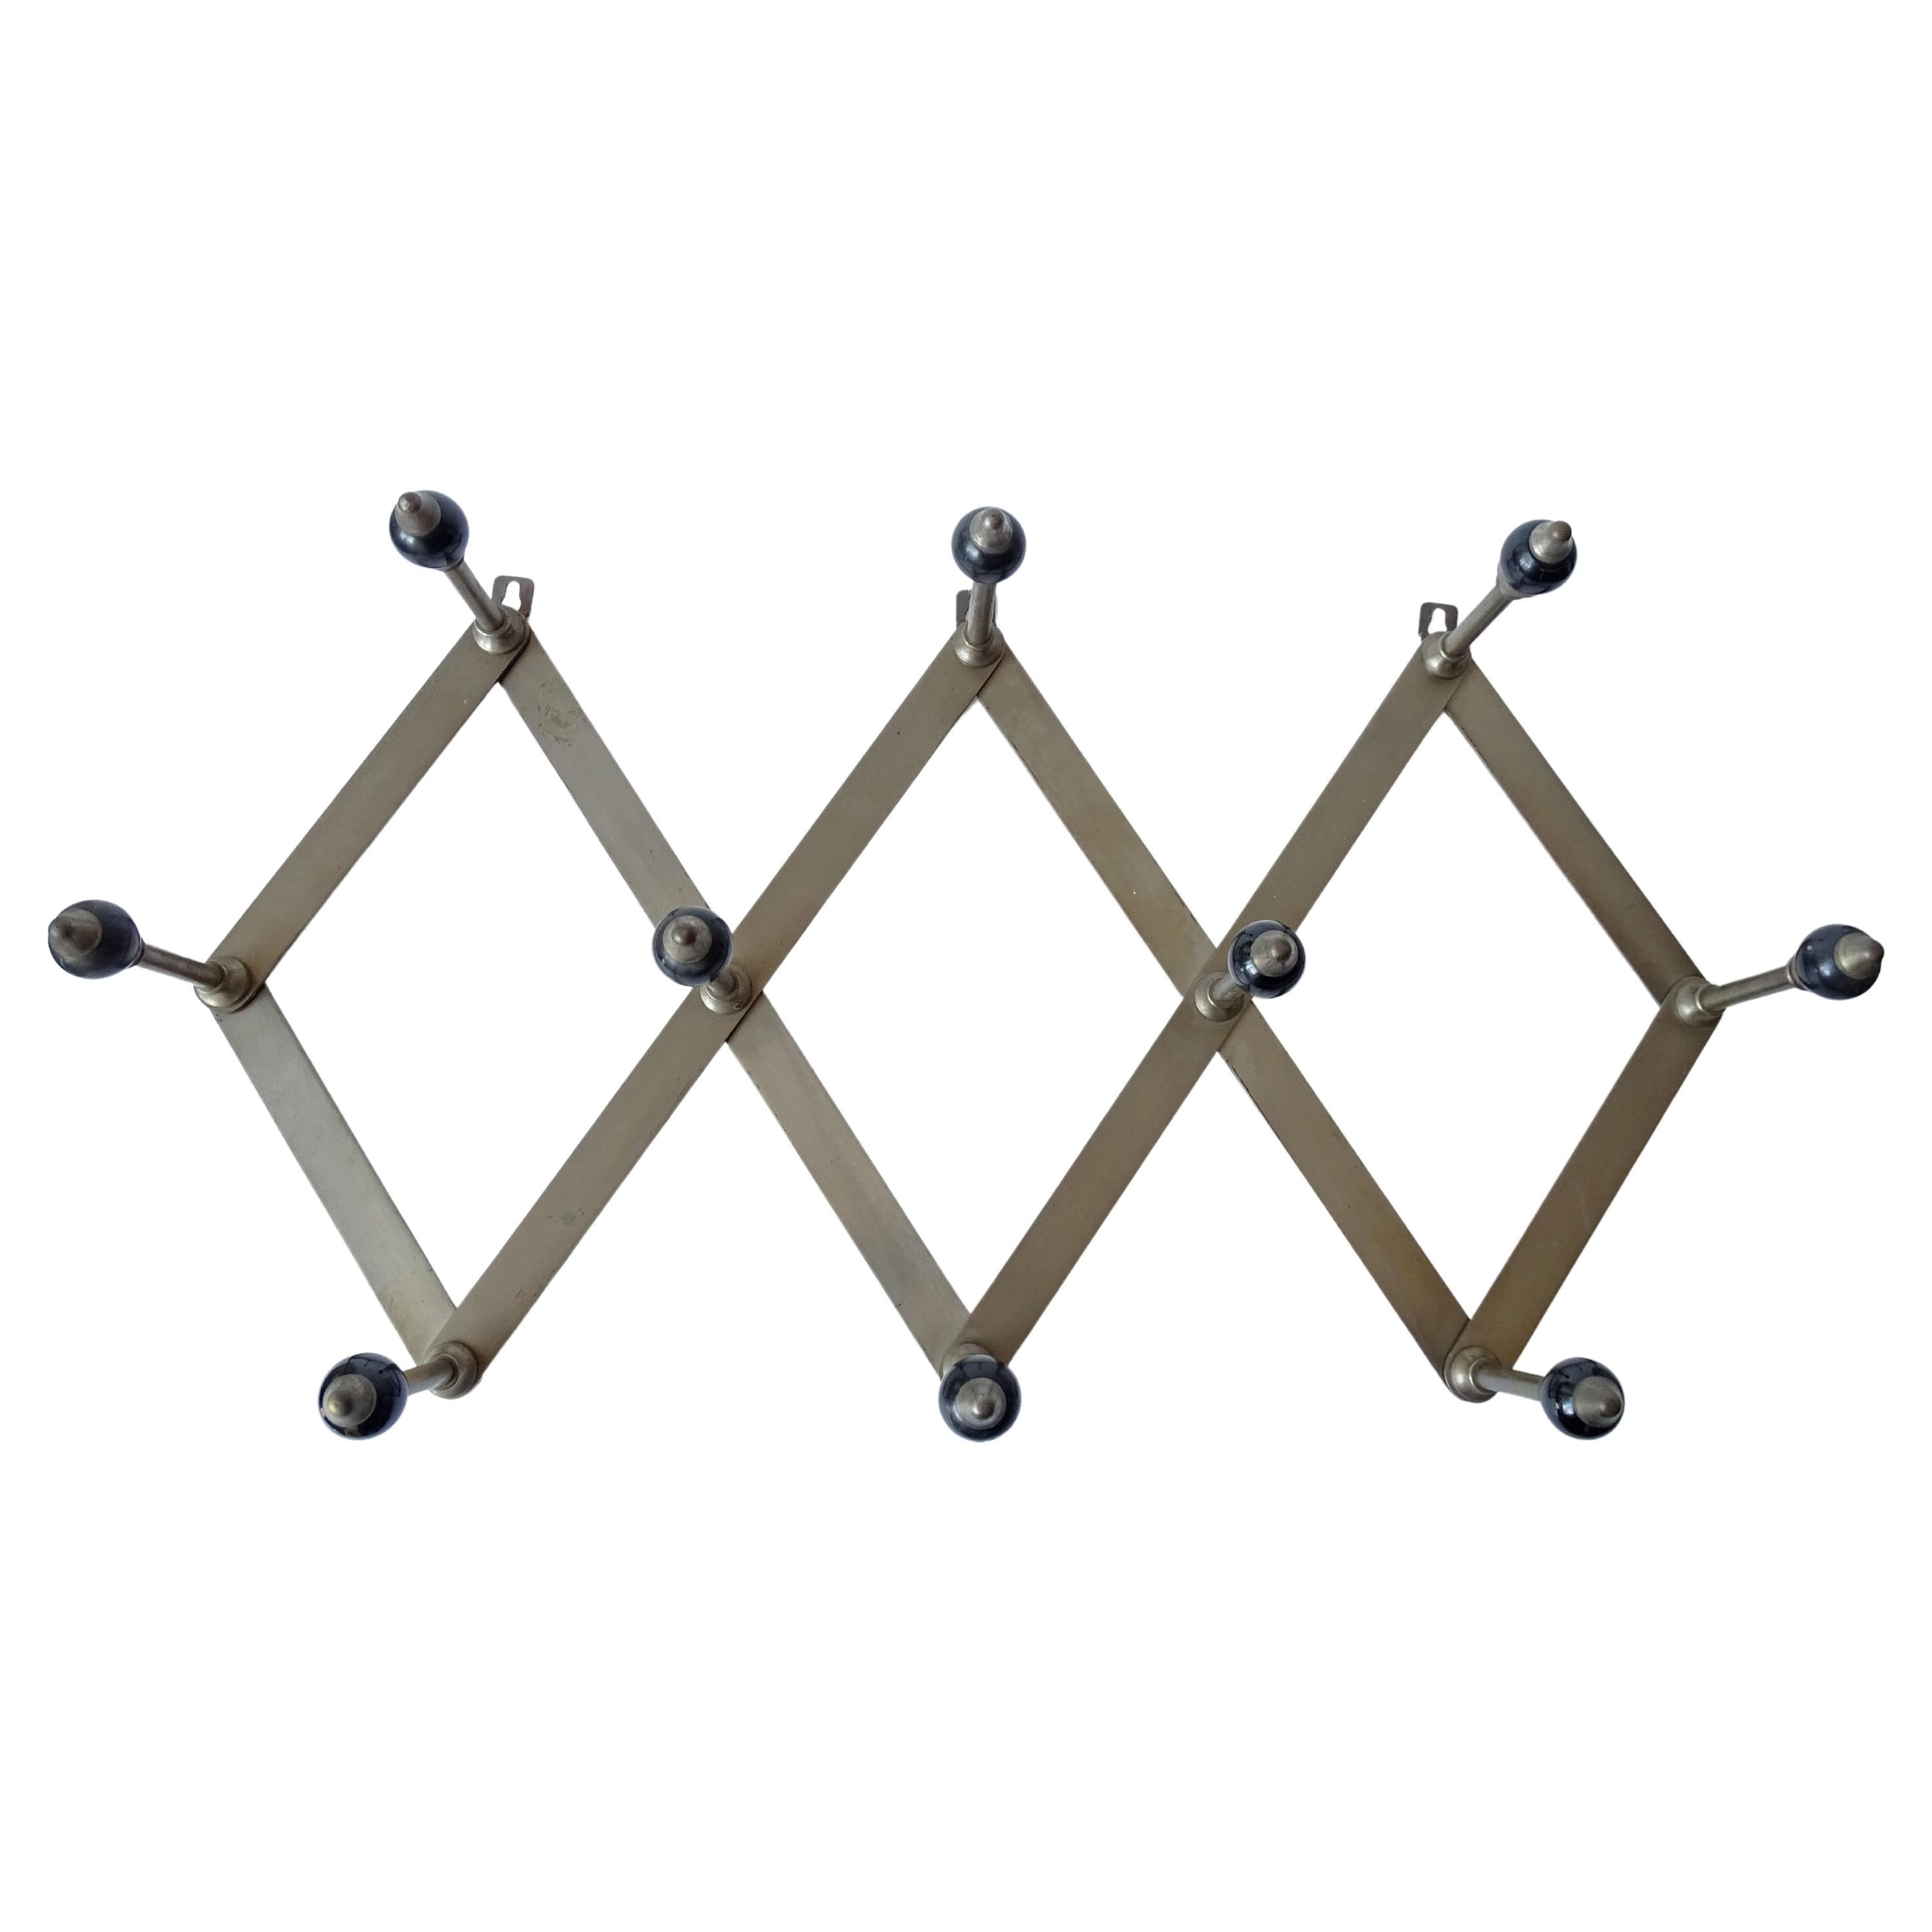 Luigi Caccia Dominioni Model A4 coat rack for Azucena in nickel-plated brass and black resin globes, Italy, 1950s.
